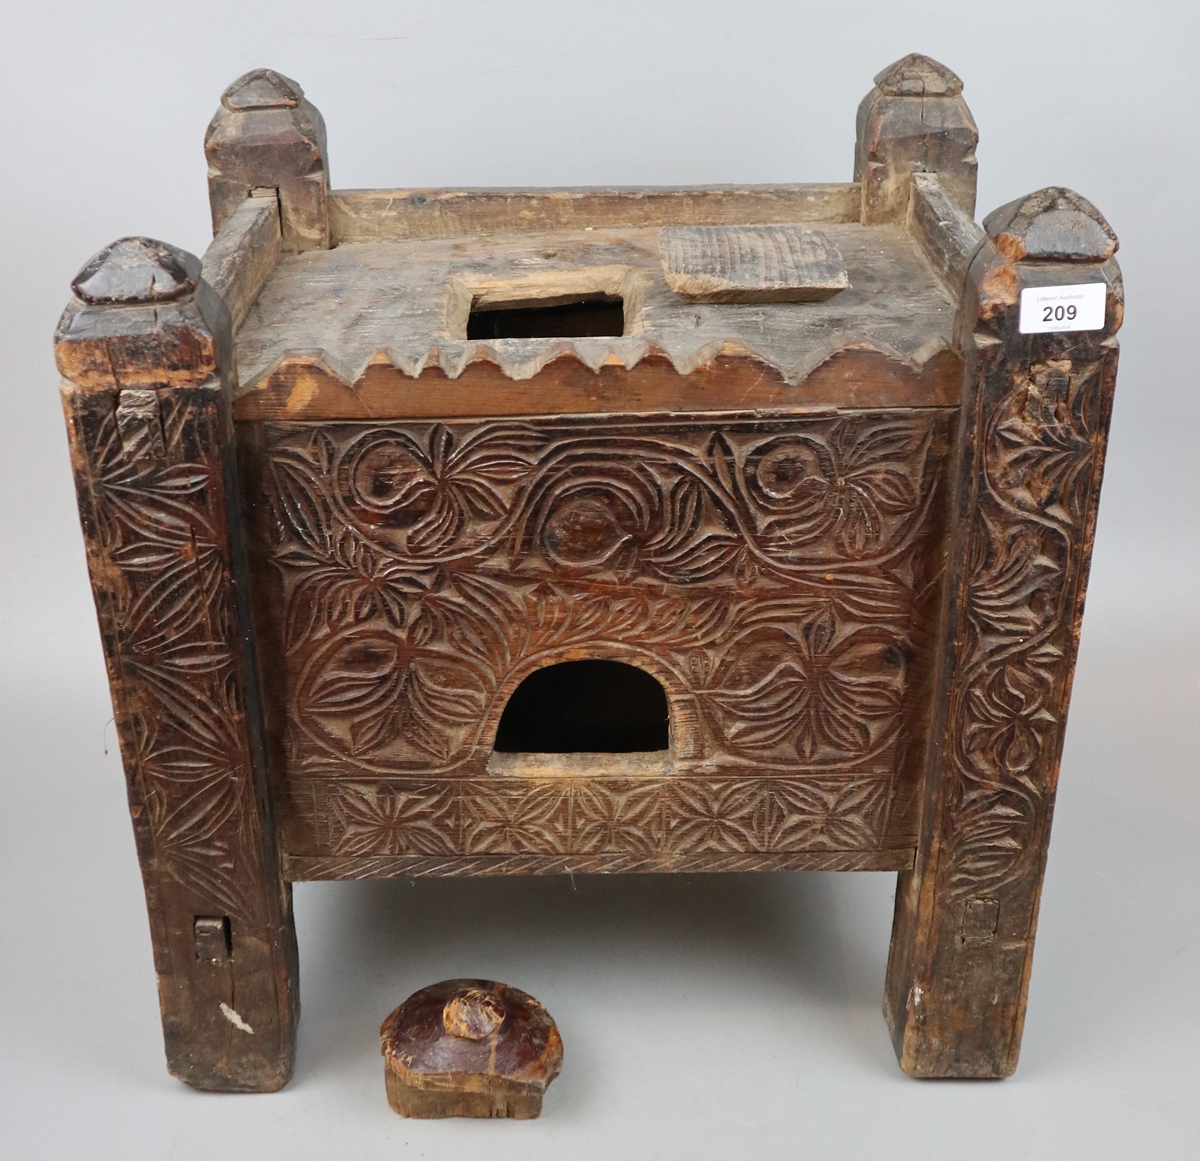 Antique carved Indian chest - Approx size: W: 49cm D: 36cm H: 53cm - Image 3 of 4